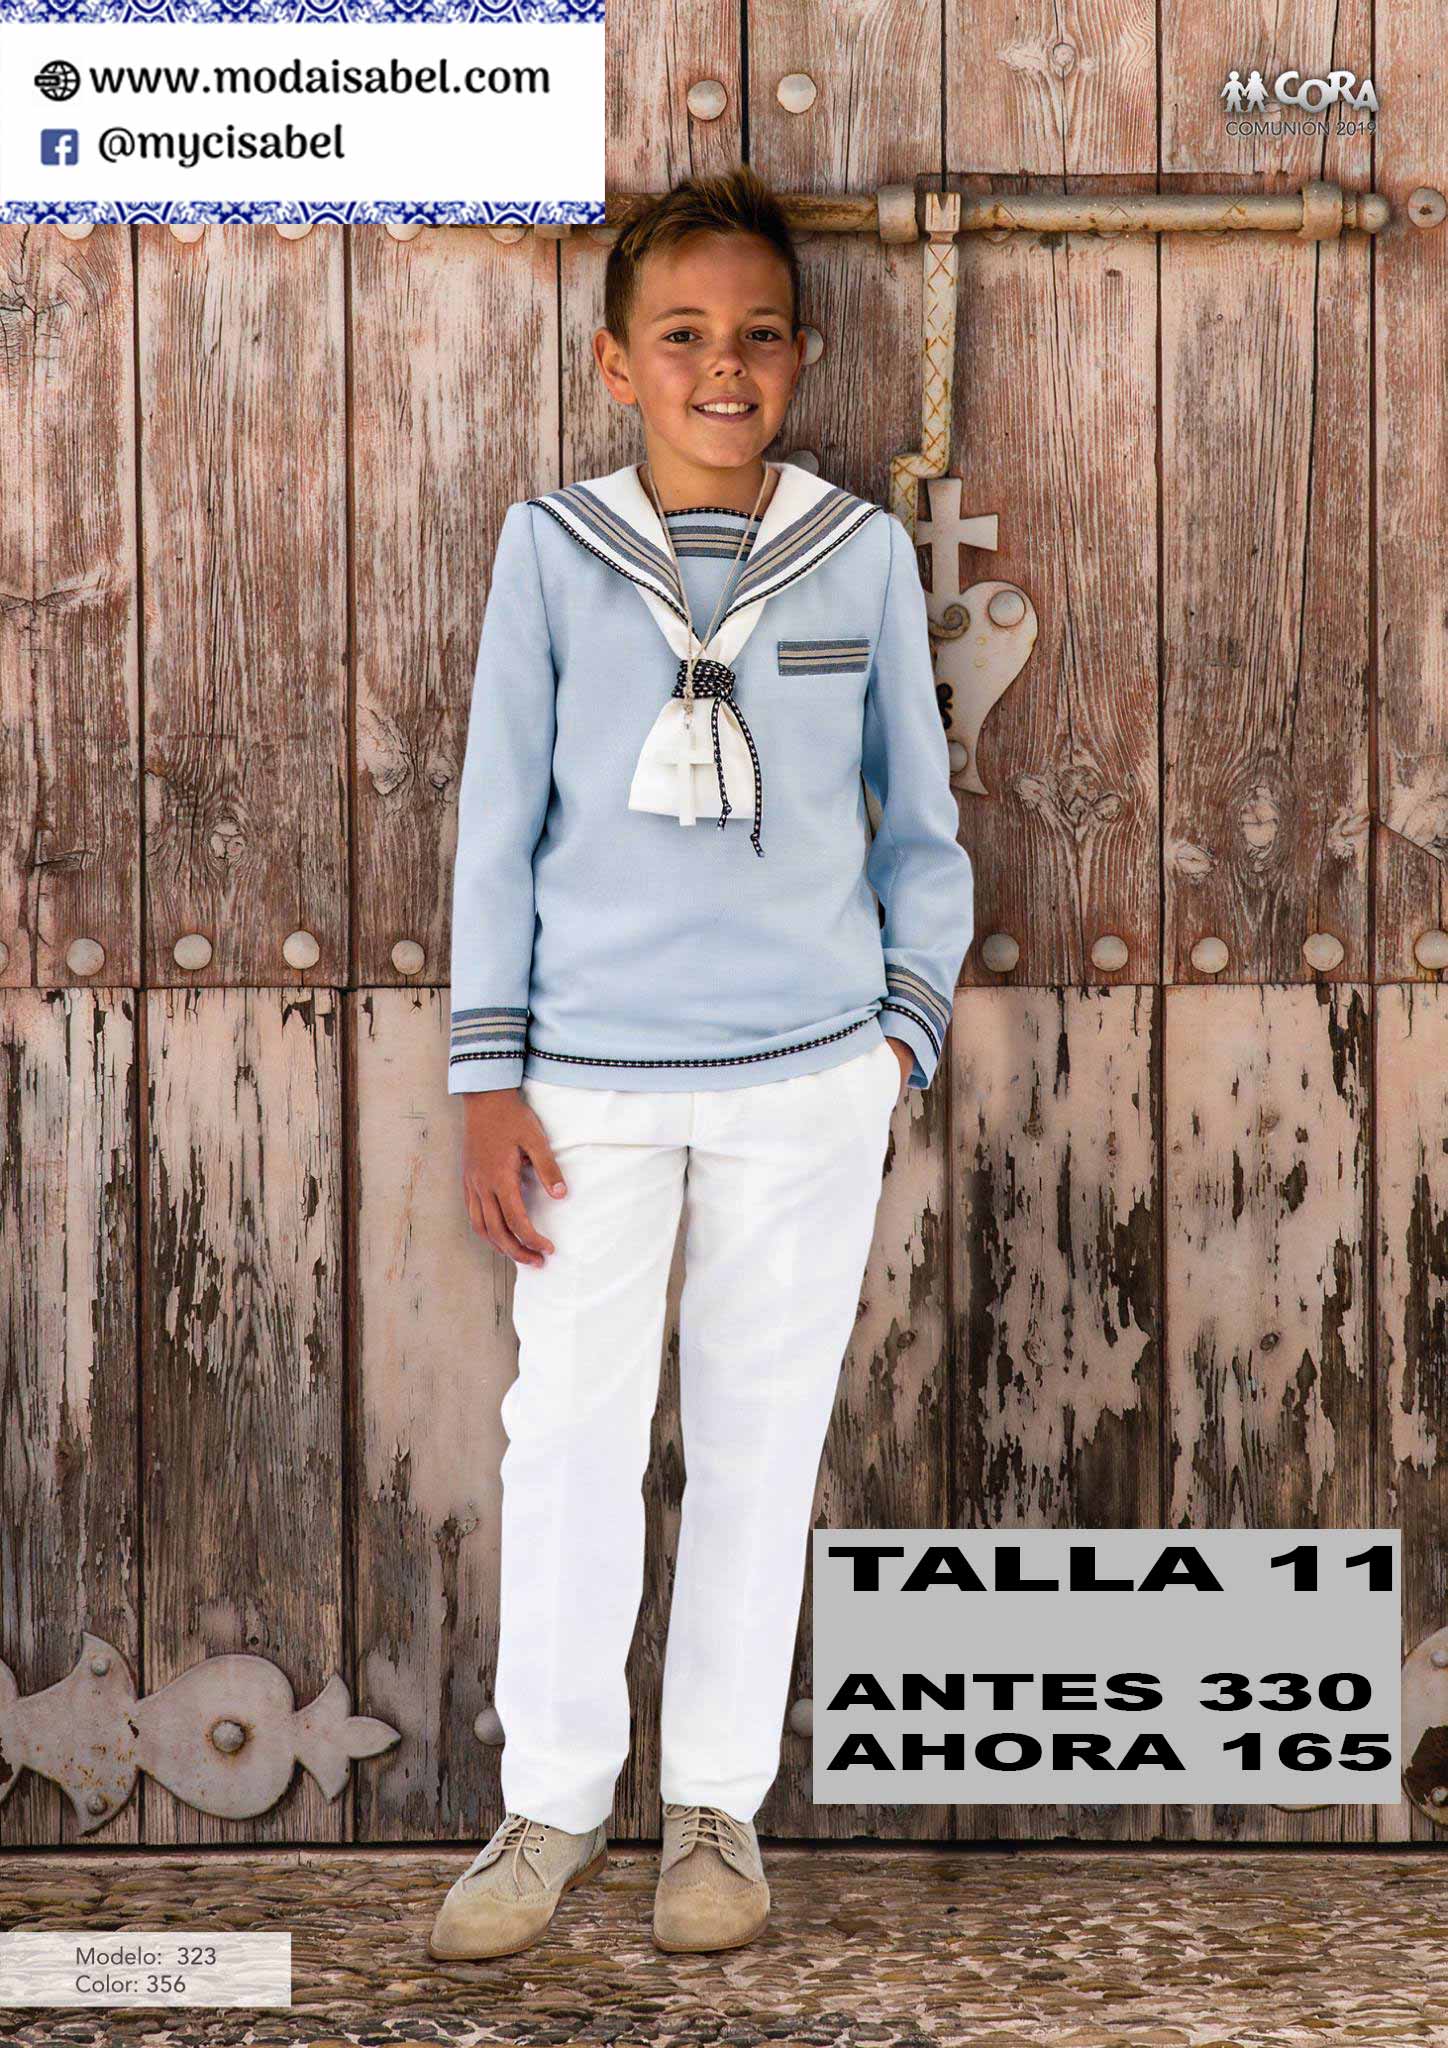 Buy Trajes Comunion 2020 | UP TO 51% OFF